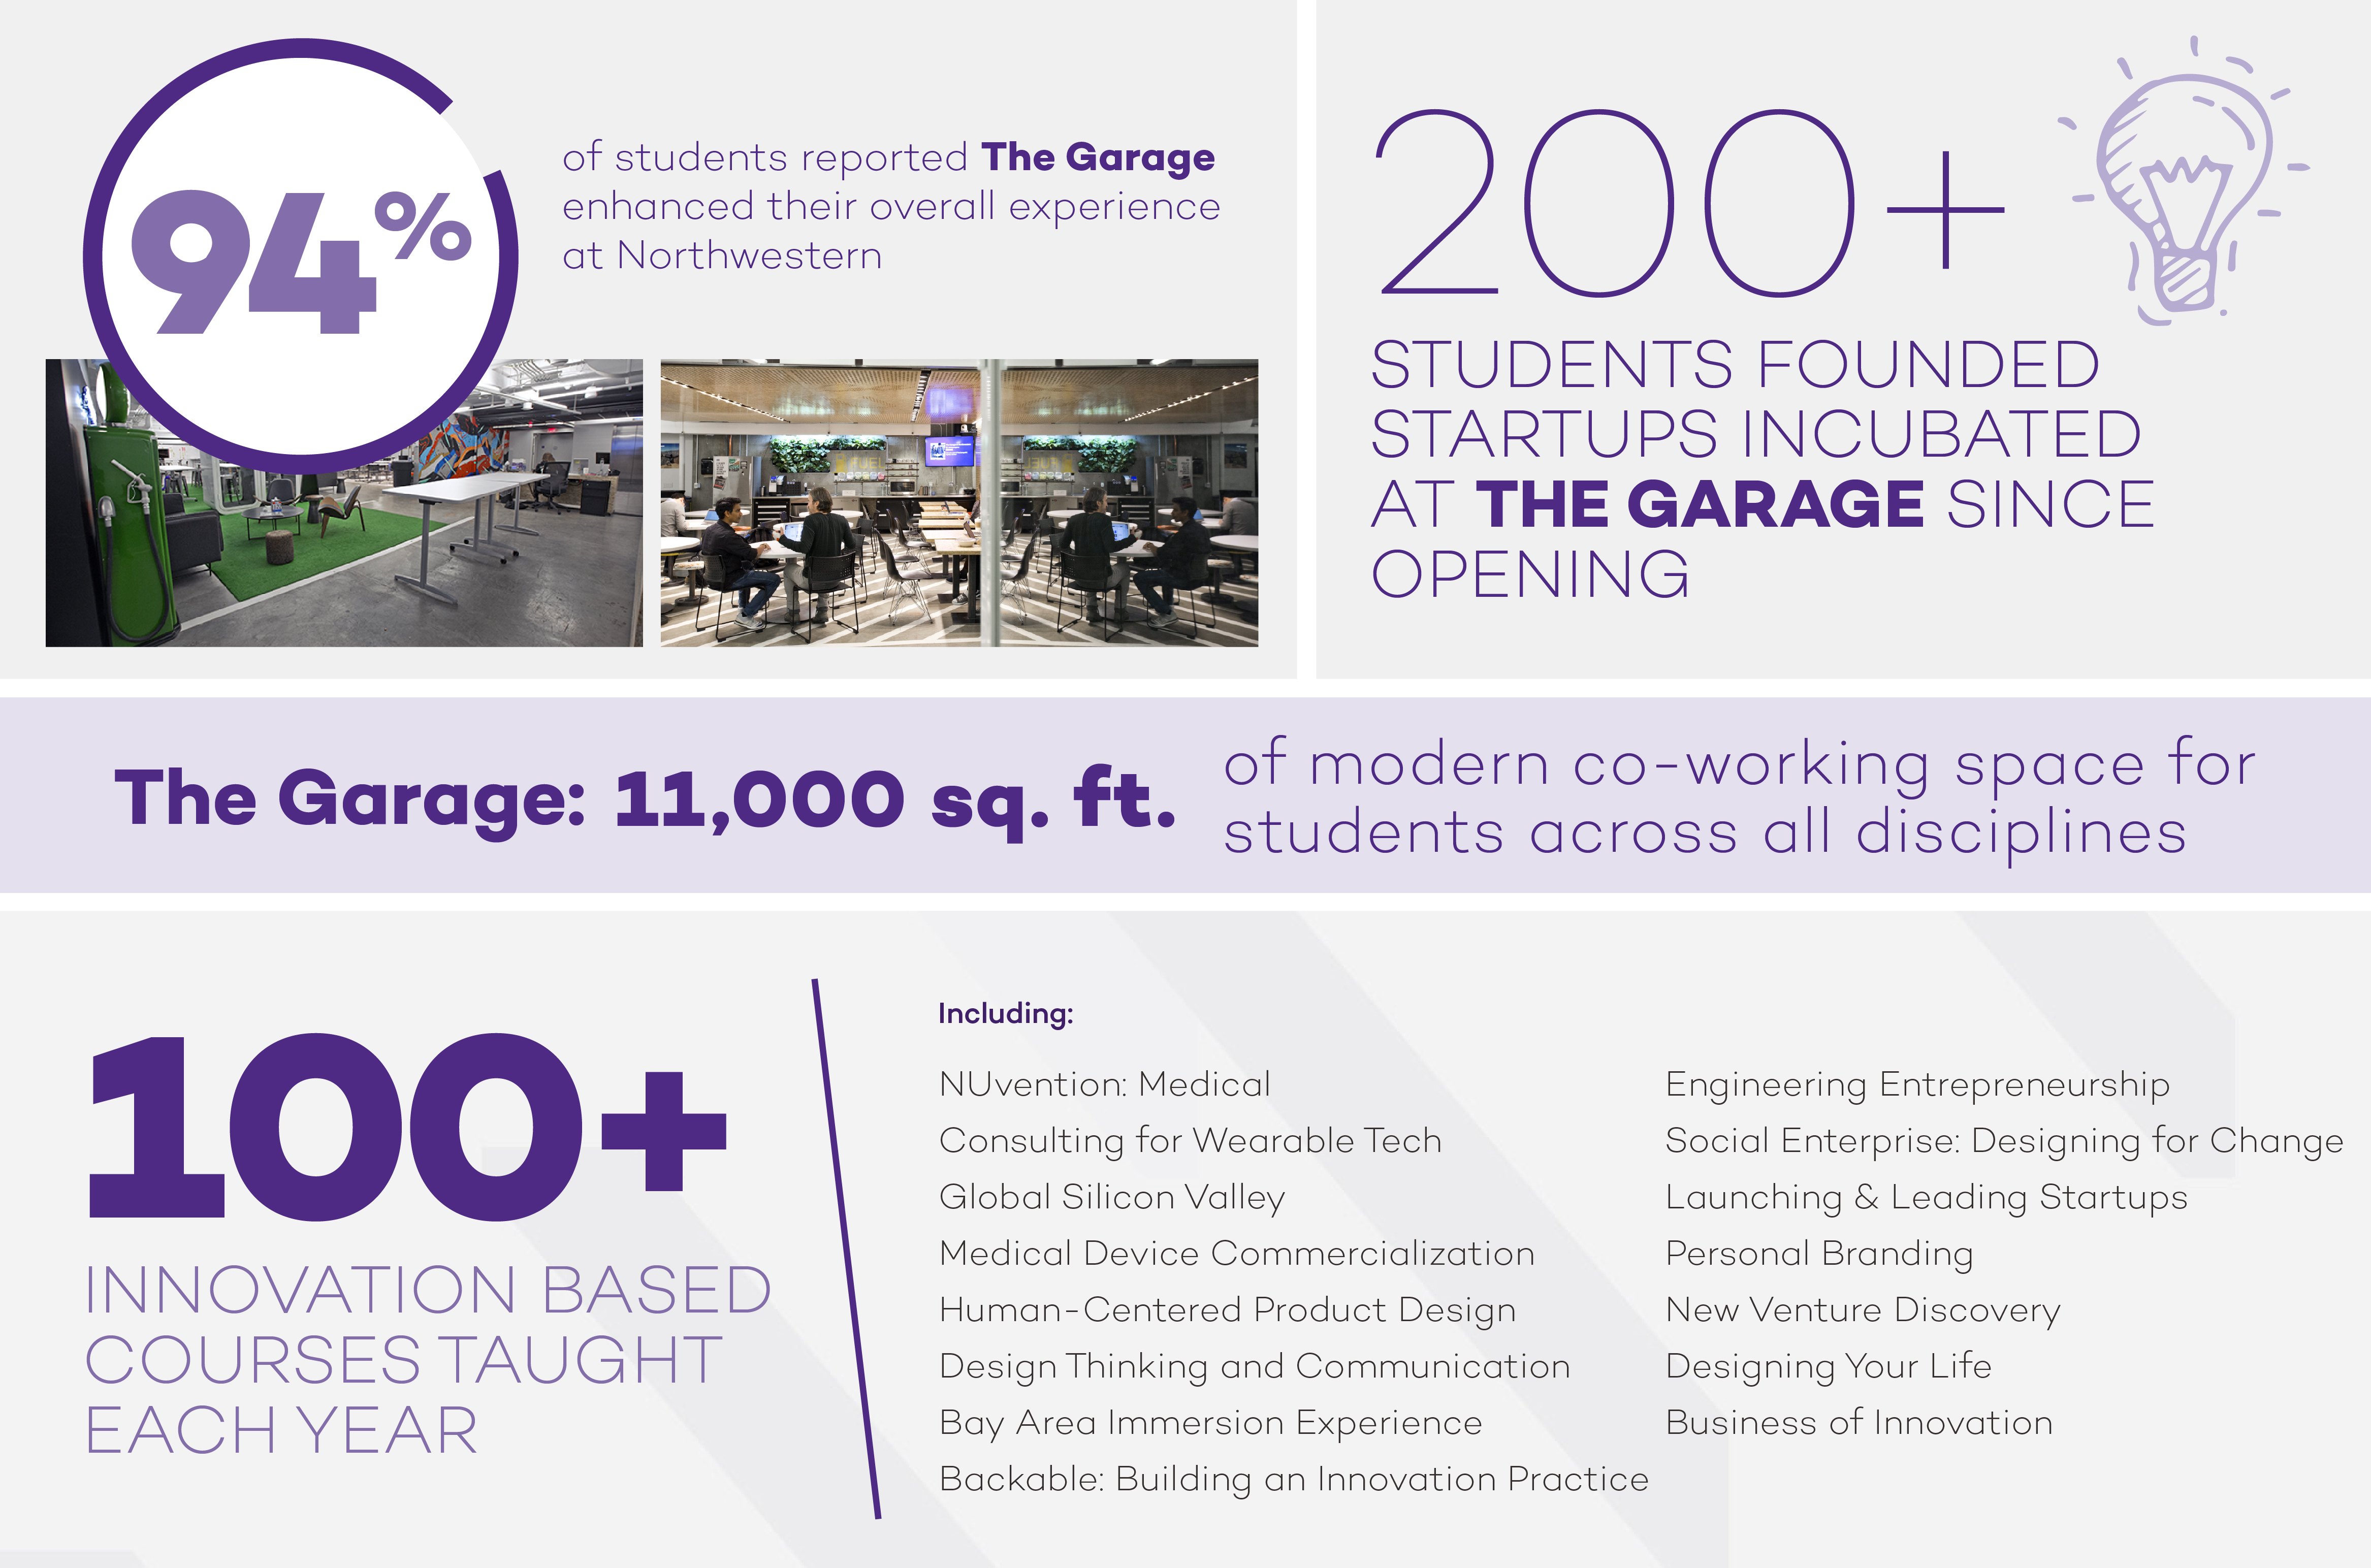 94% of students reported The Garage enhanced their overall experience at Northwestern. 200+ students founded startups incubated at The Garage since opening. The Garage: 11,000 sq. ft. of modern co-working space for students across all disciplines. 100+ innovation based courses taught each year, including: NUvention: Medical, consulting for Wearable Tech, Engineering Entrepreneurship, Social Enterprise: Designing for Change, Personal Branding, Backable: Building an Innovation Practice.